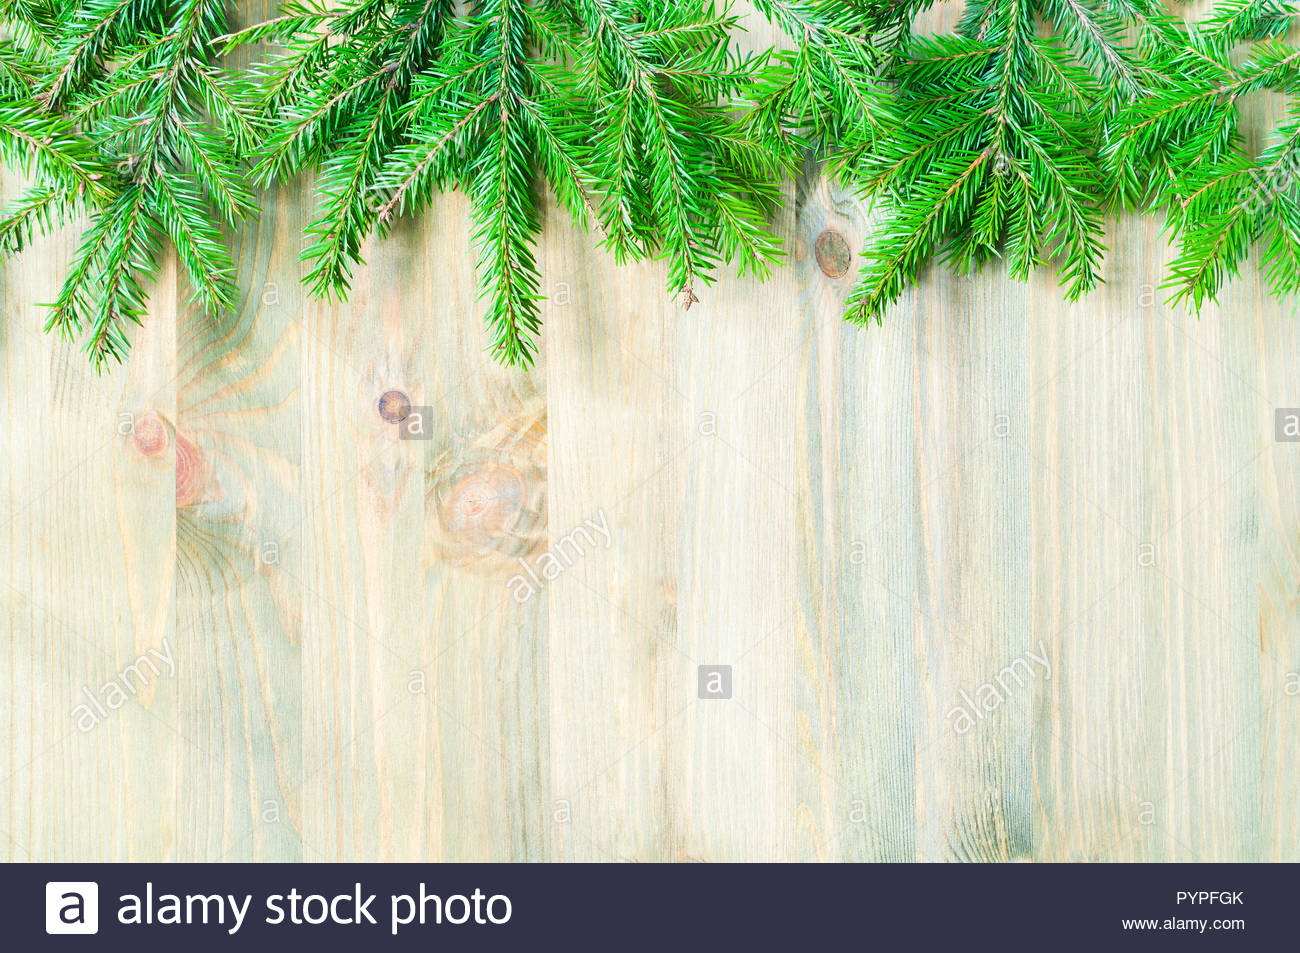 Winter Background Green Fir Tree Branches On The Wooden